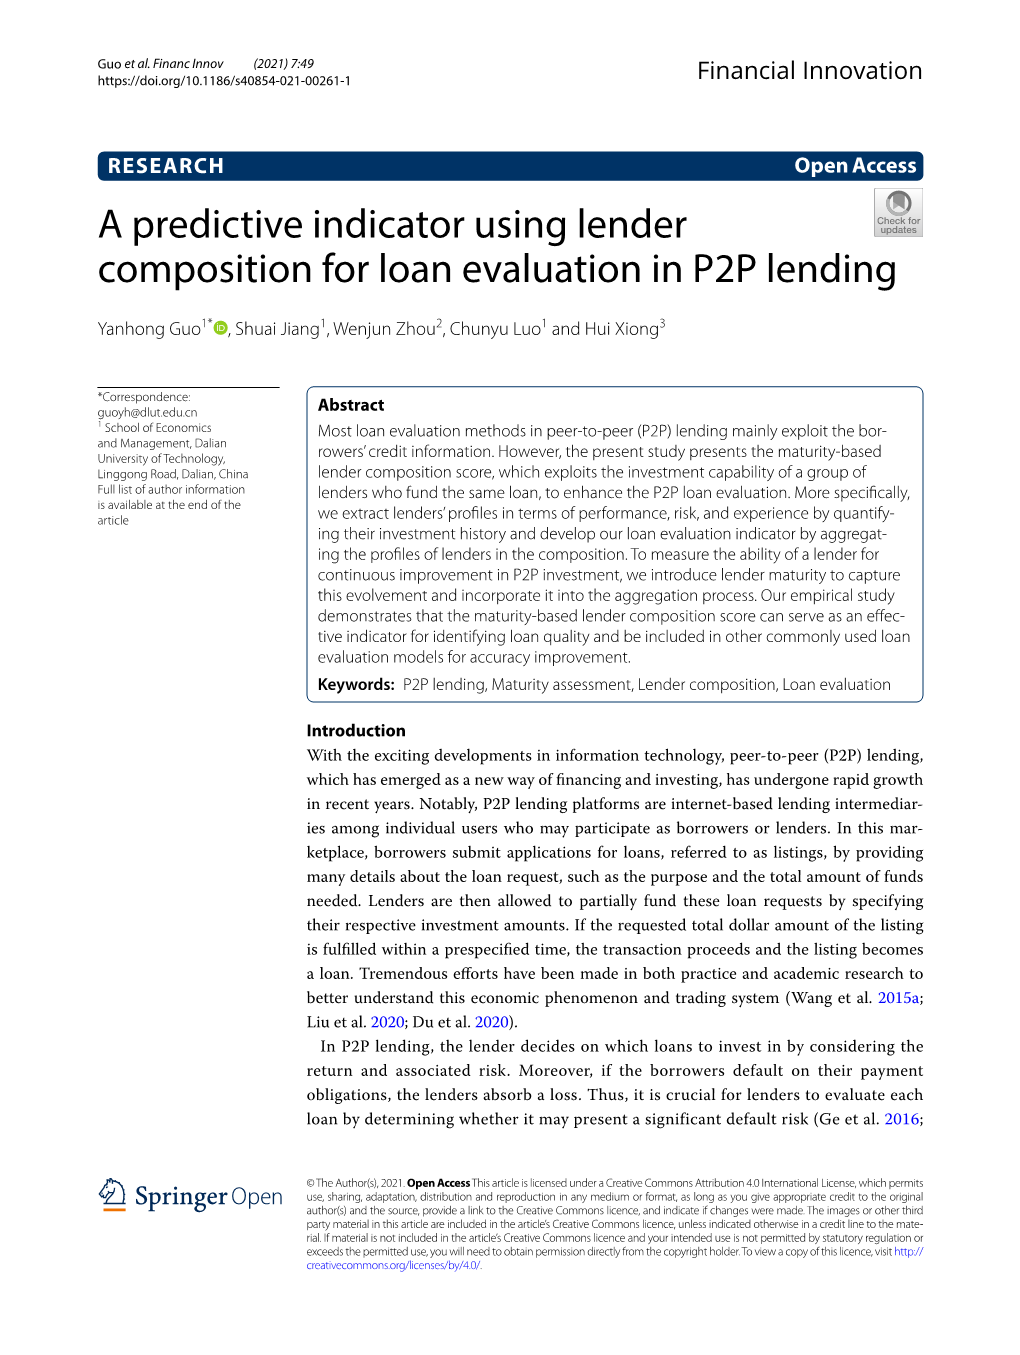 A Predictive Indicator Using Lender Composition for Loan Evaluation in P2P Lending